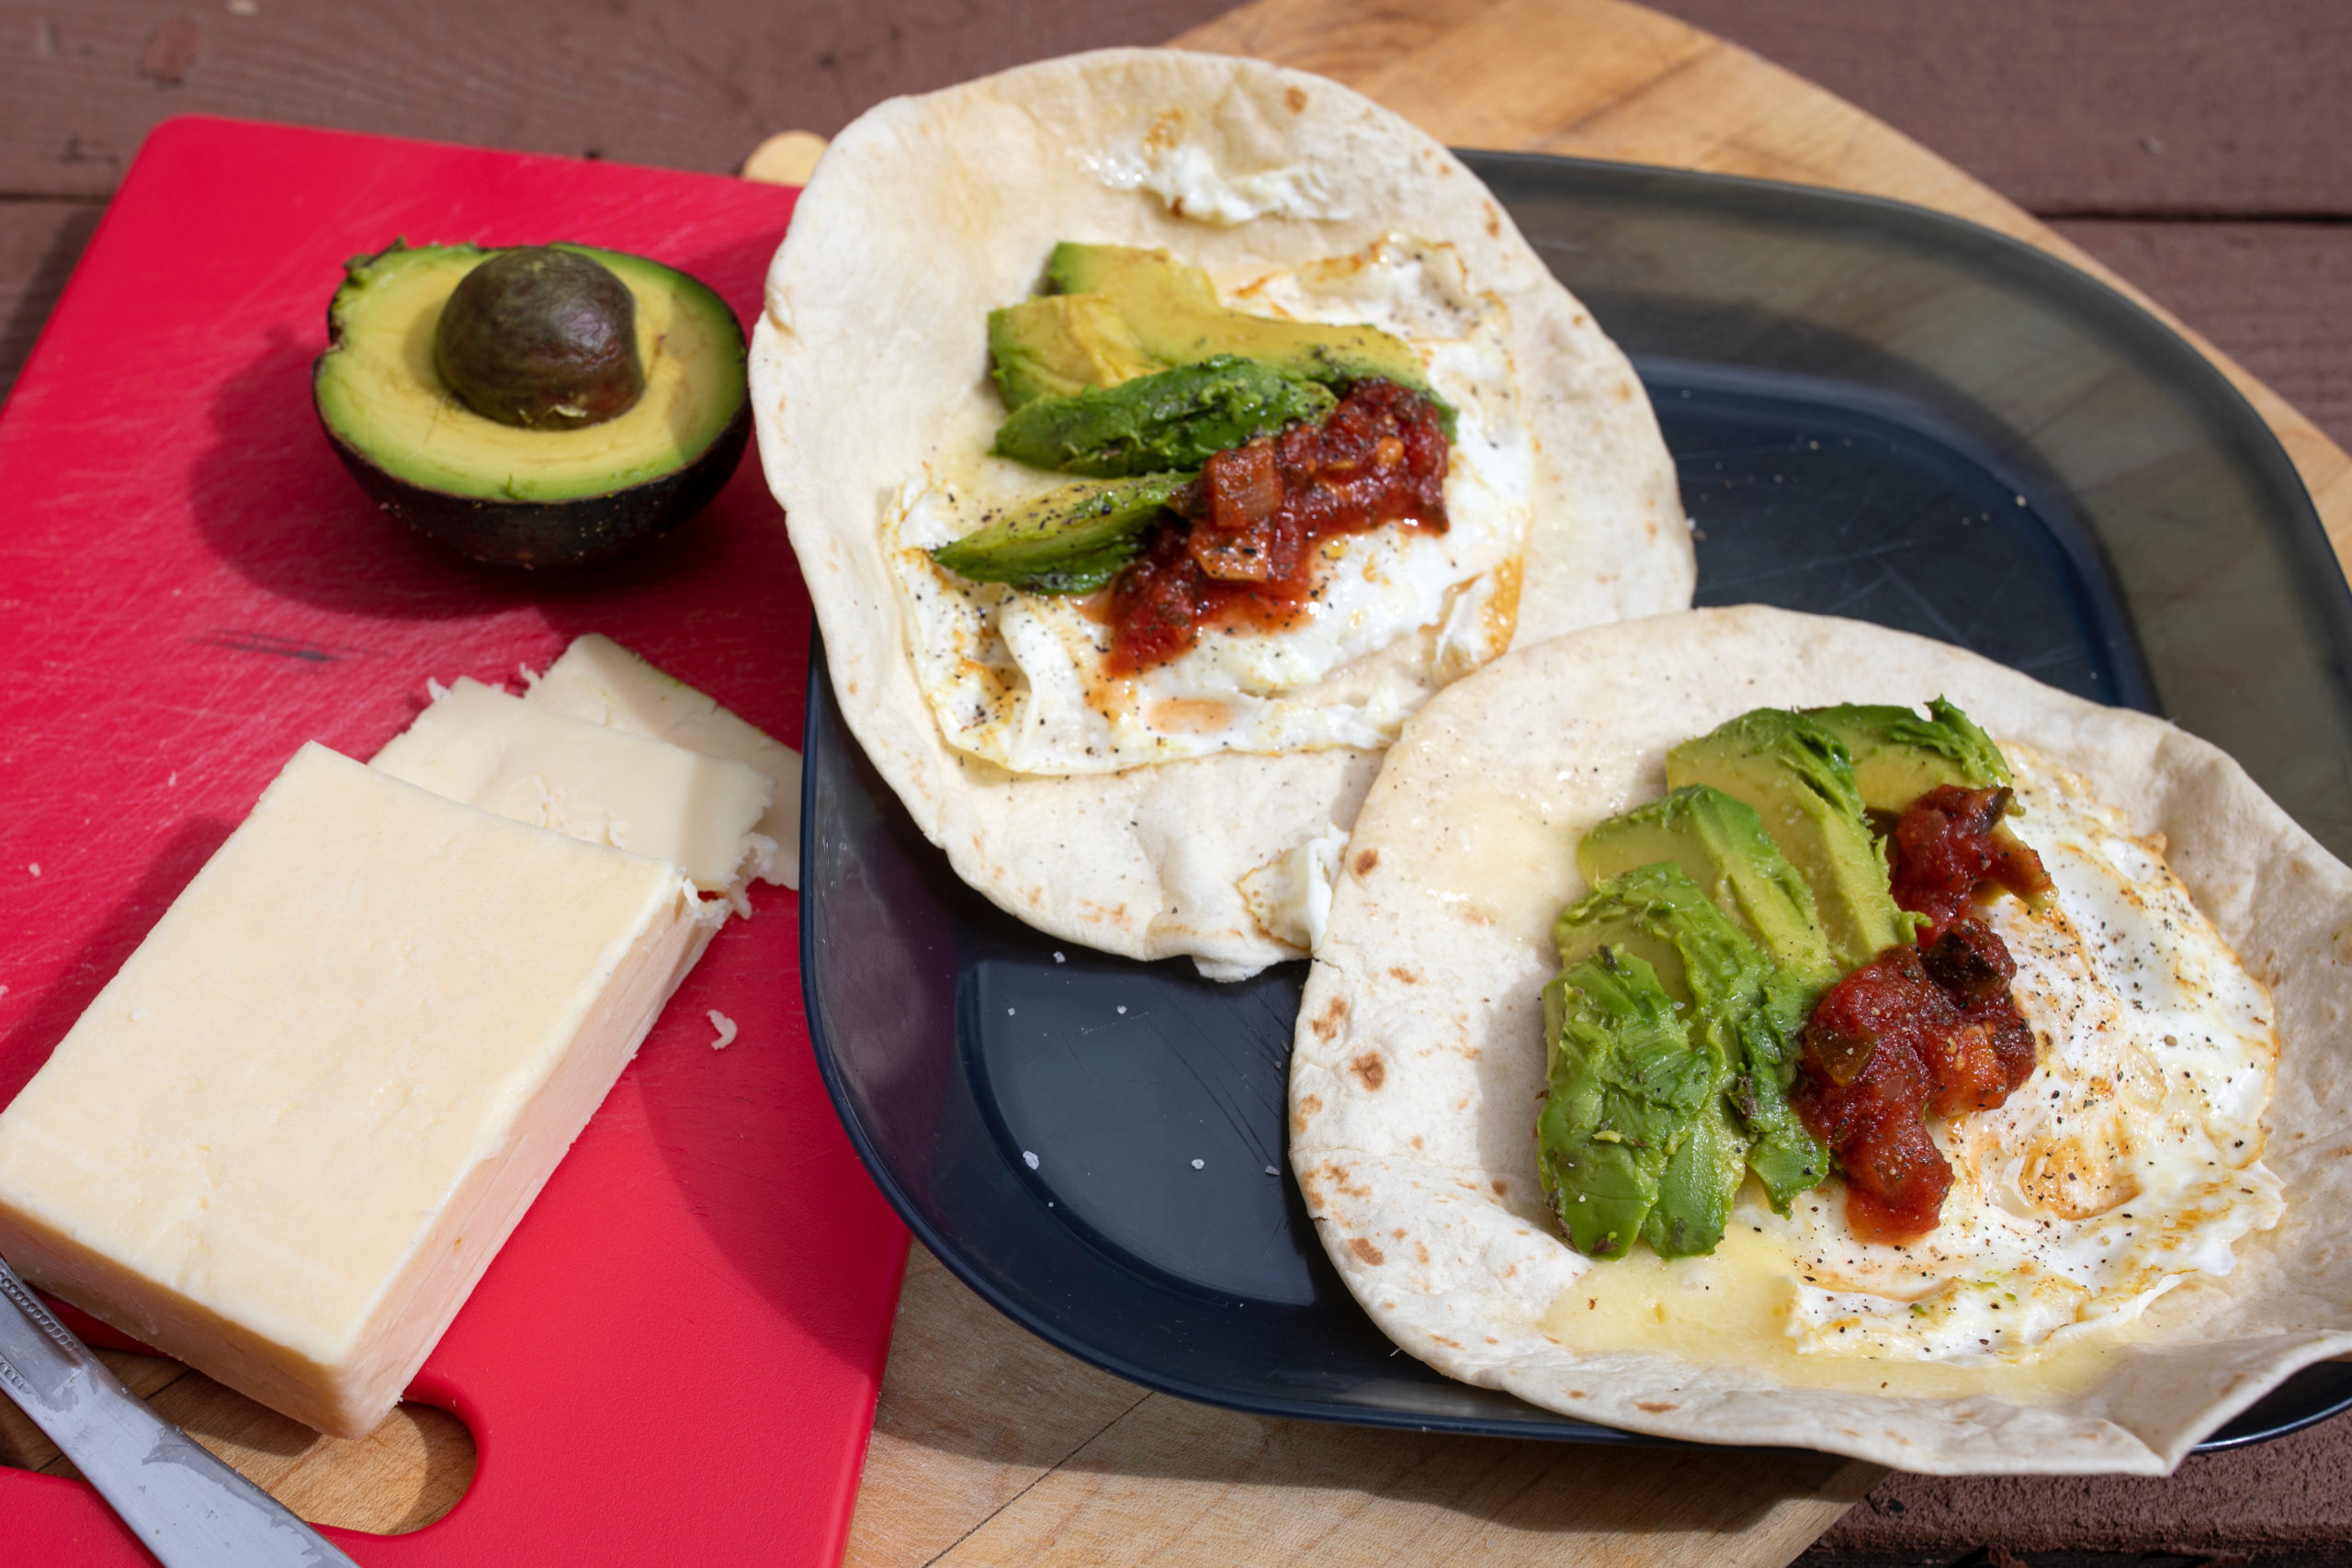 Two tortillas each filled with a friend egg, avocado, salsa, and cheese sit on a plate. A block of cheese and half an avocado sit on a cutting board beside.